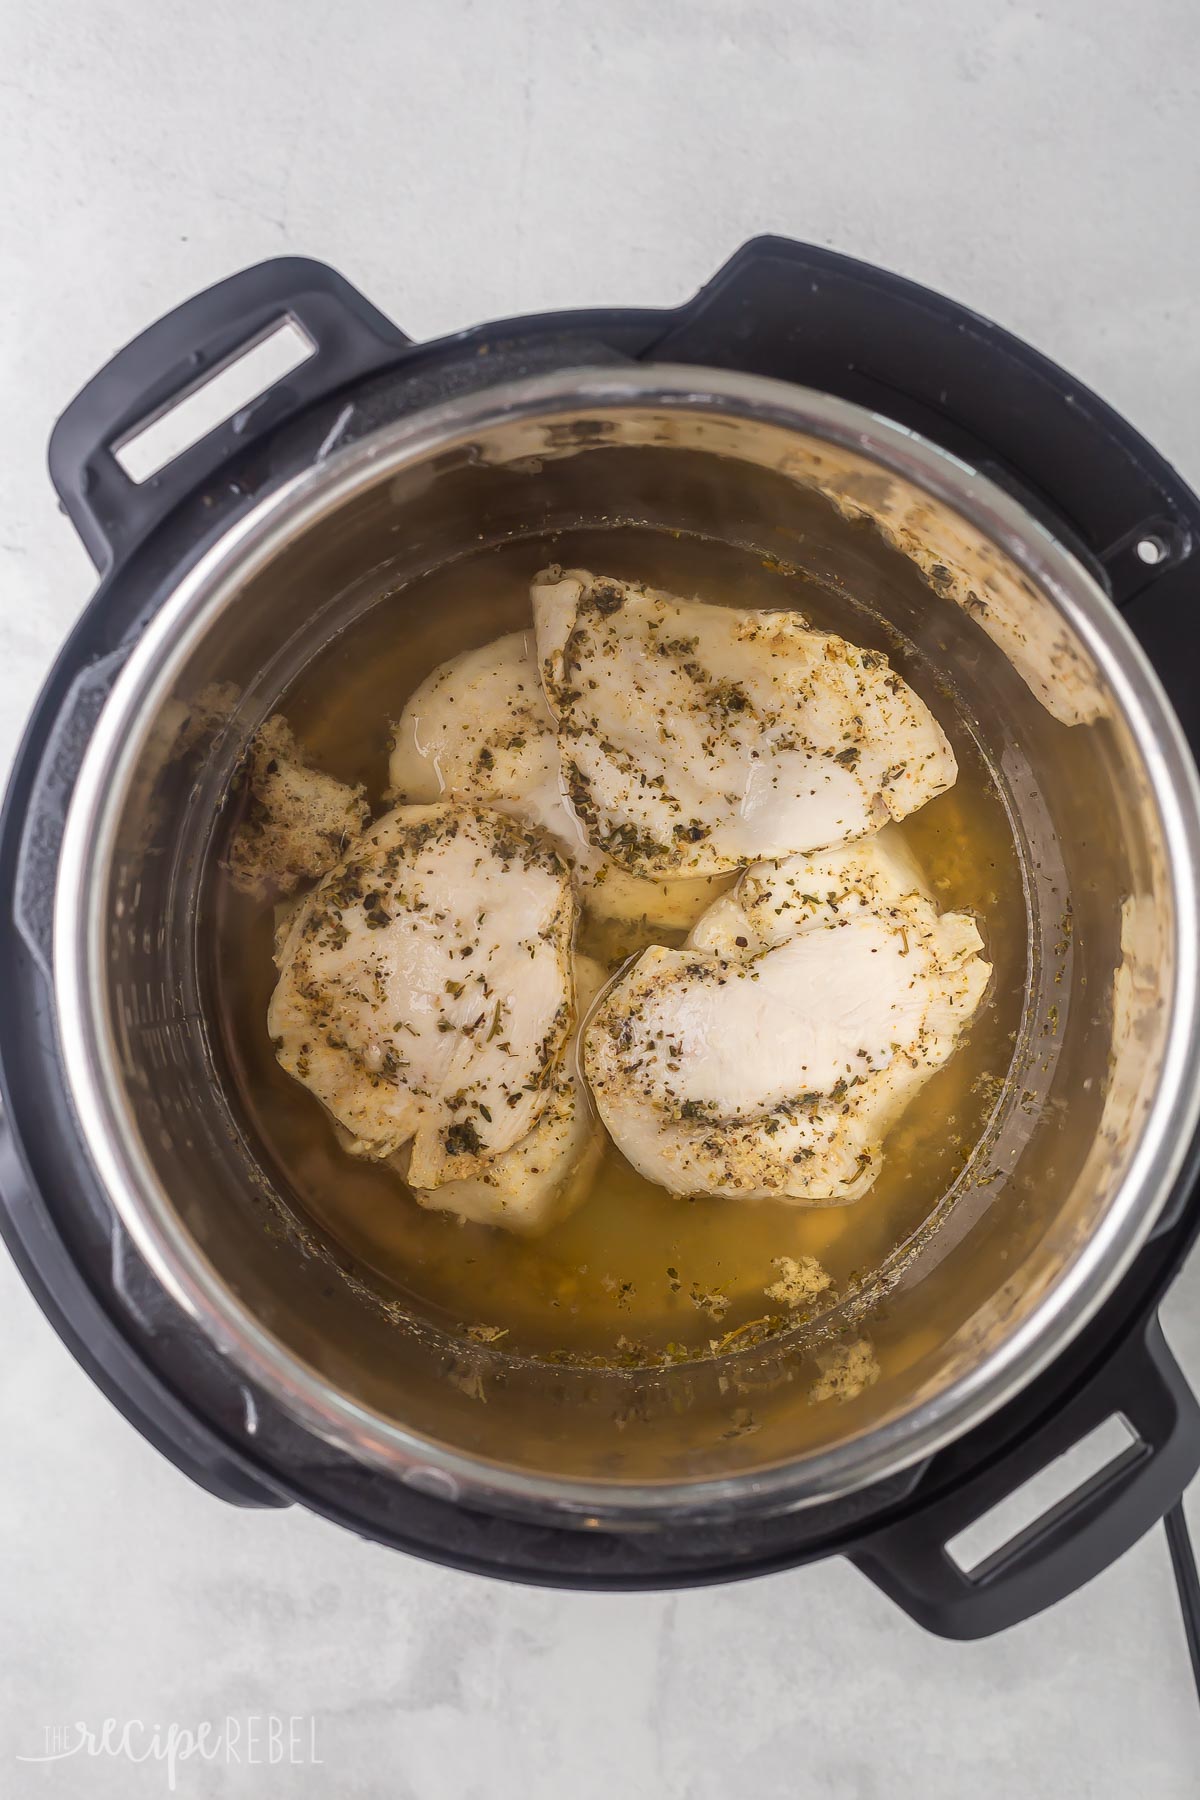 cooked chicken breasts in instant pot ready to shred.